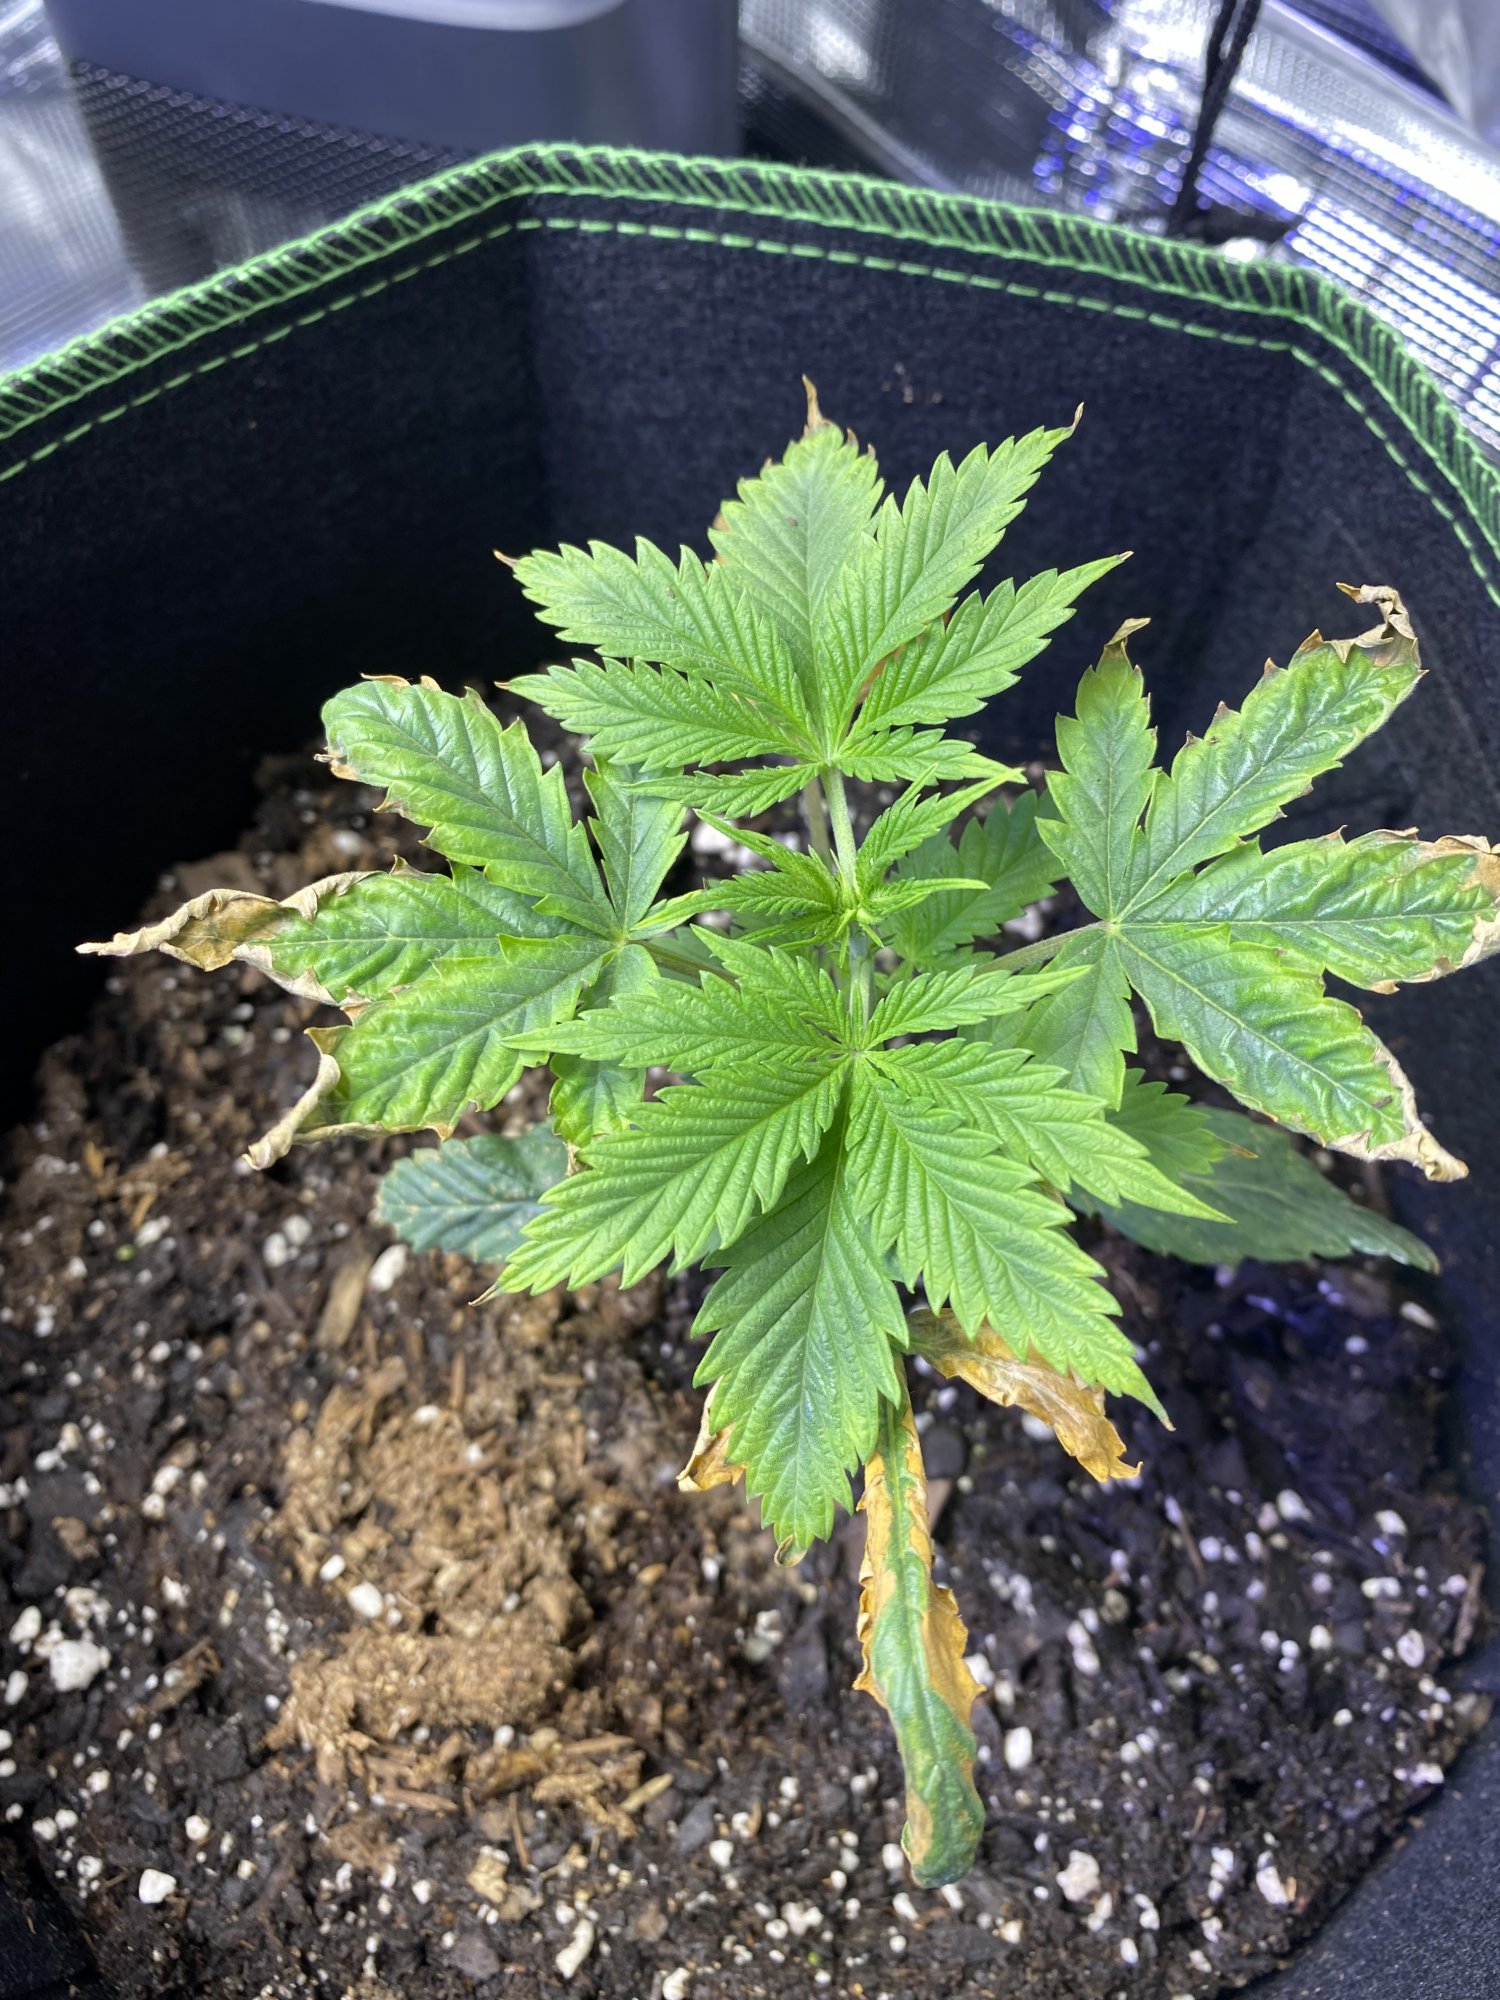 Leaves turning yellowbrown on sides  curling pics included